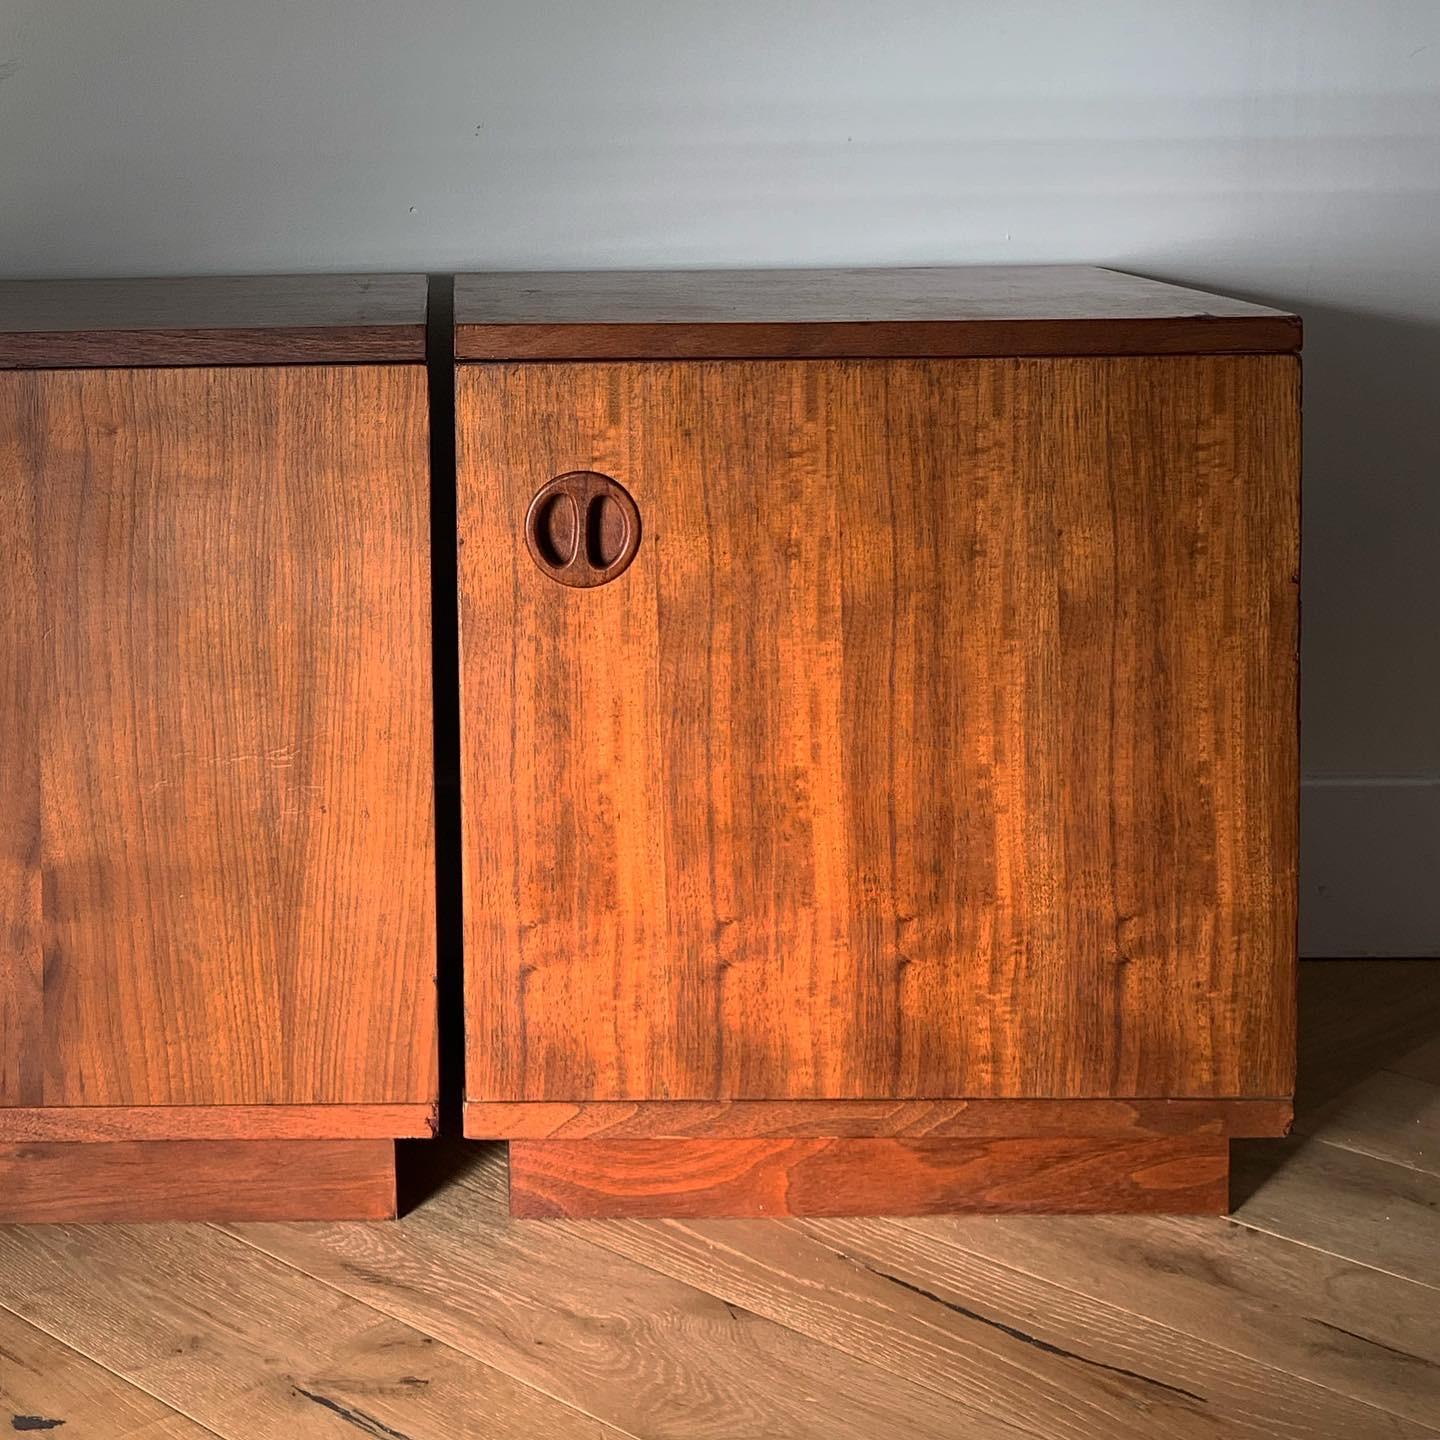 Danish school mid century nightstands in teak, a pair, made in Japan 1960s. Minor wear to edges (see photos for detailed closeups) but overall fabulous condition and clean interiors. Pick up in LA or delivery options available. 
Measures: 16” W x